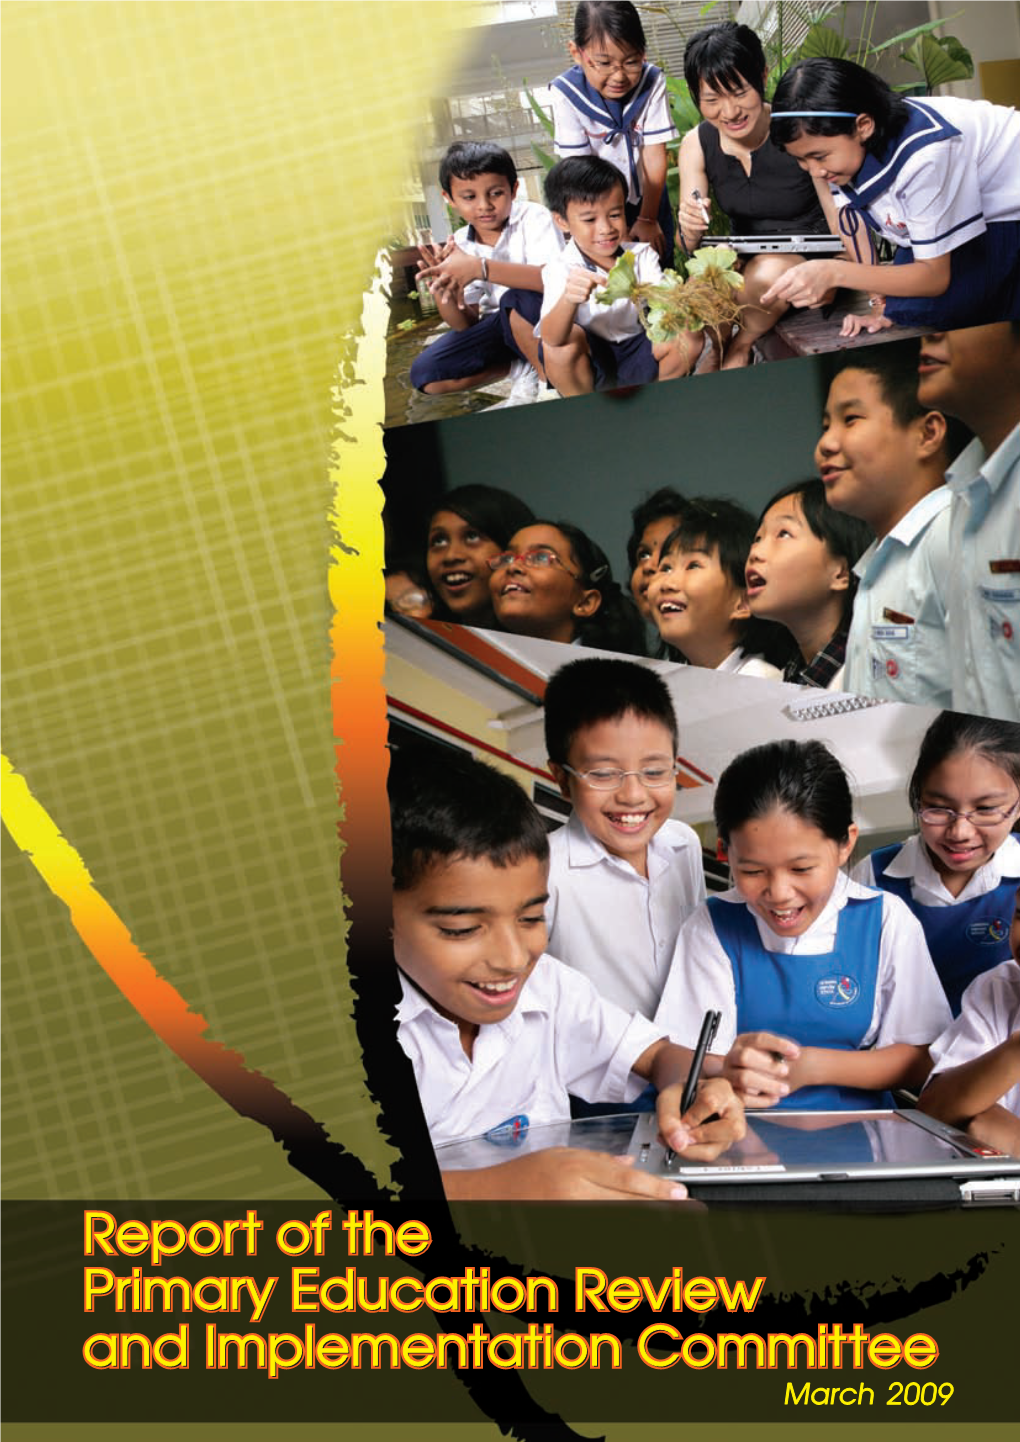 Report of the Primary Education Review and Implementation Committee